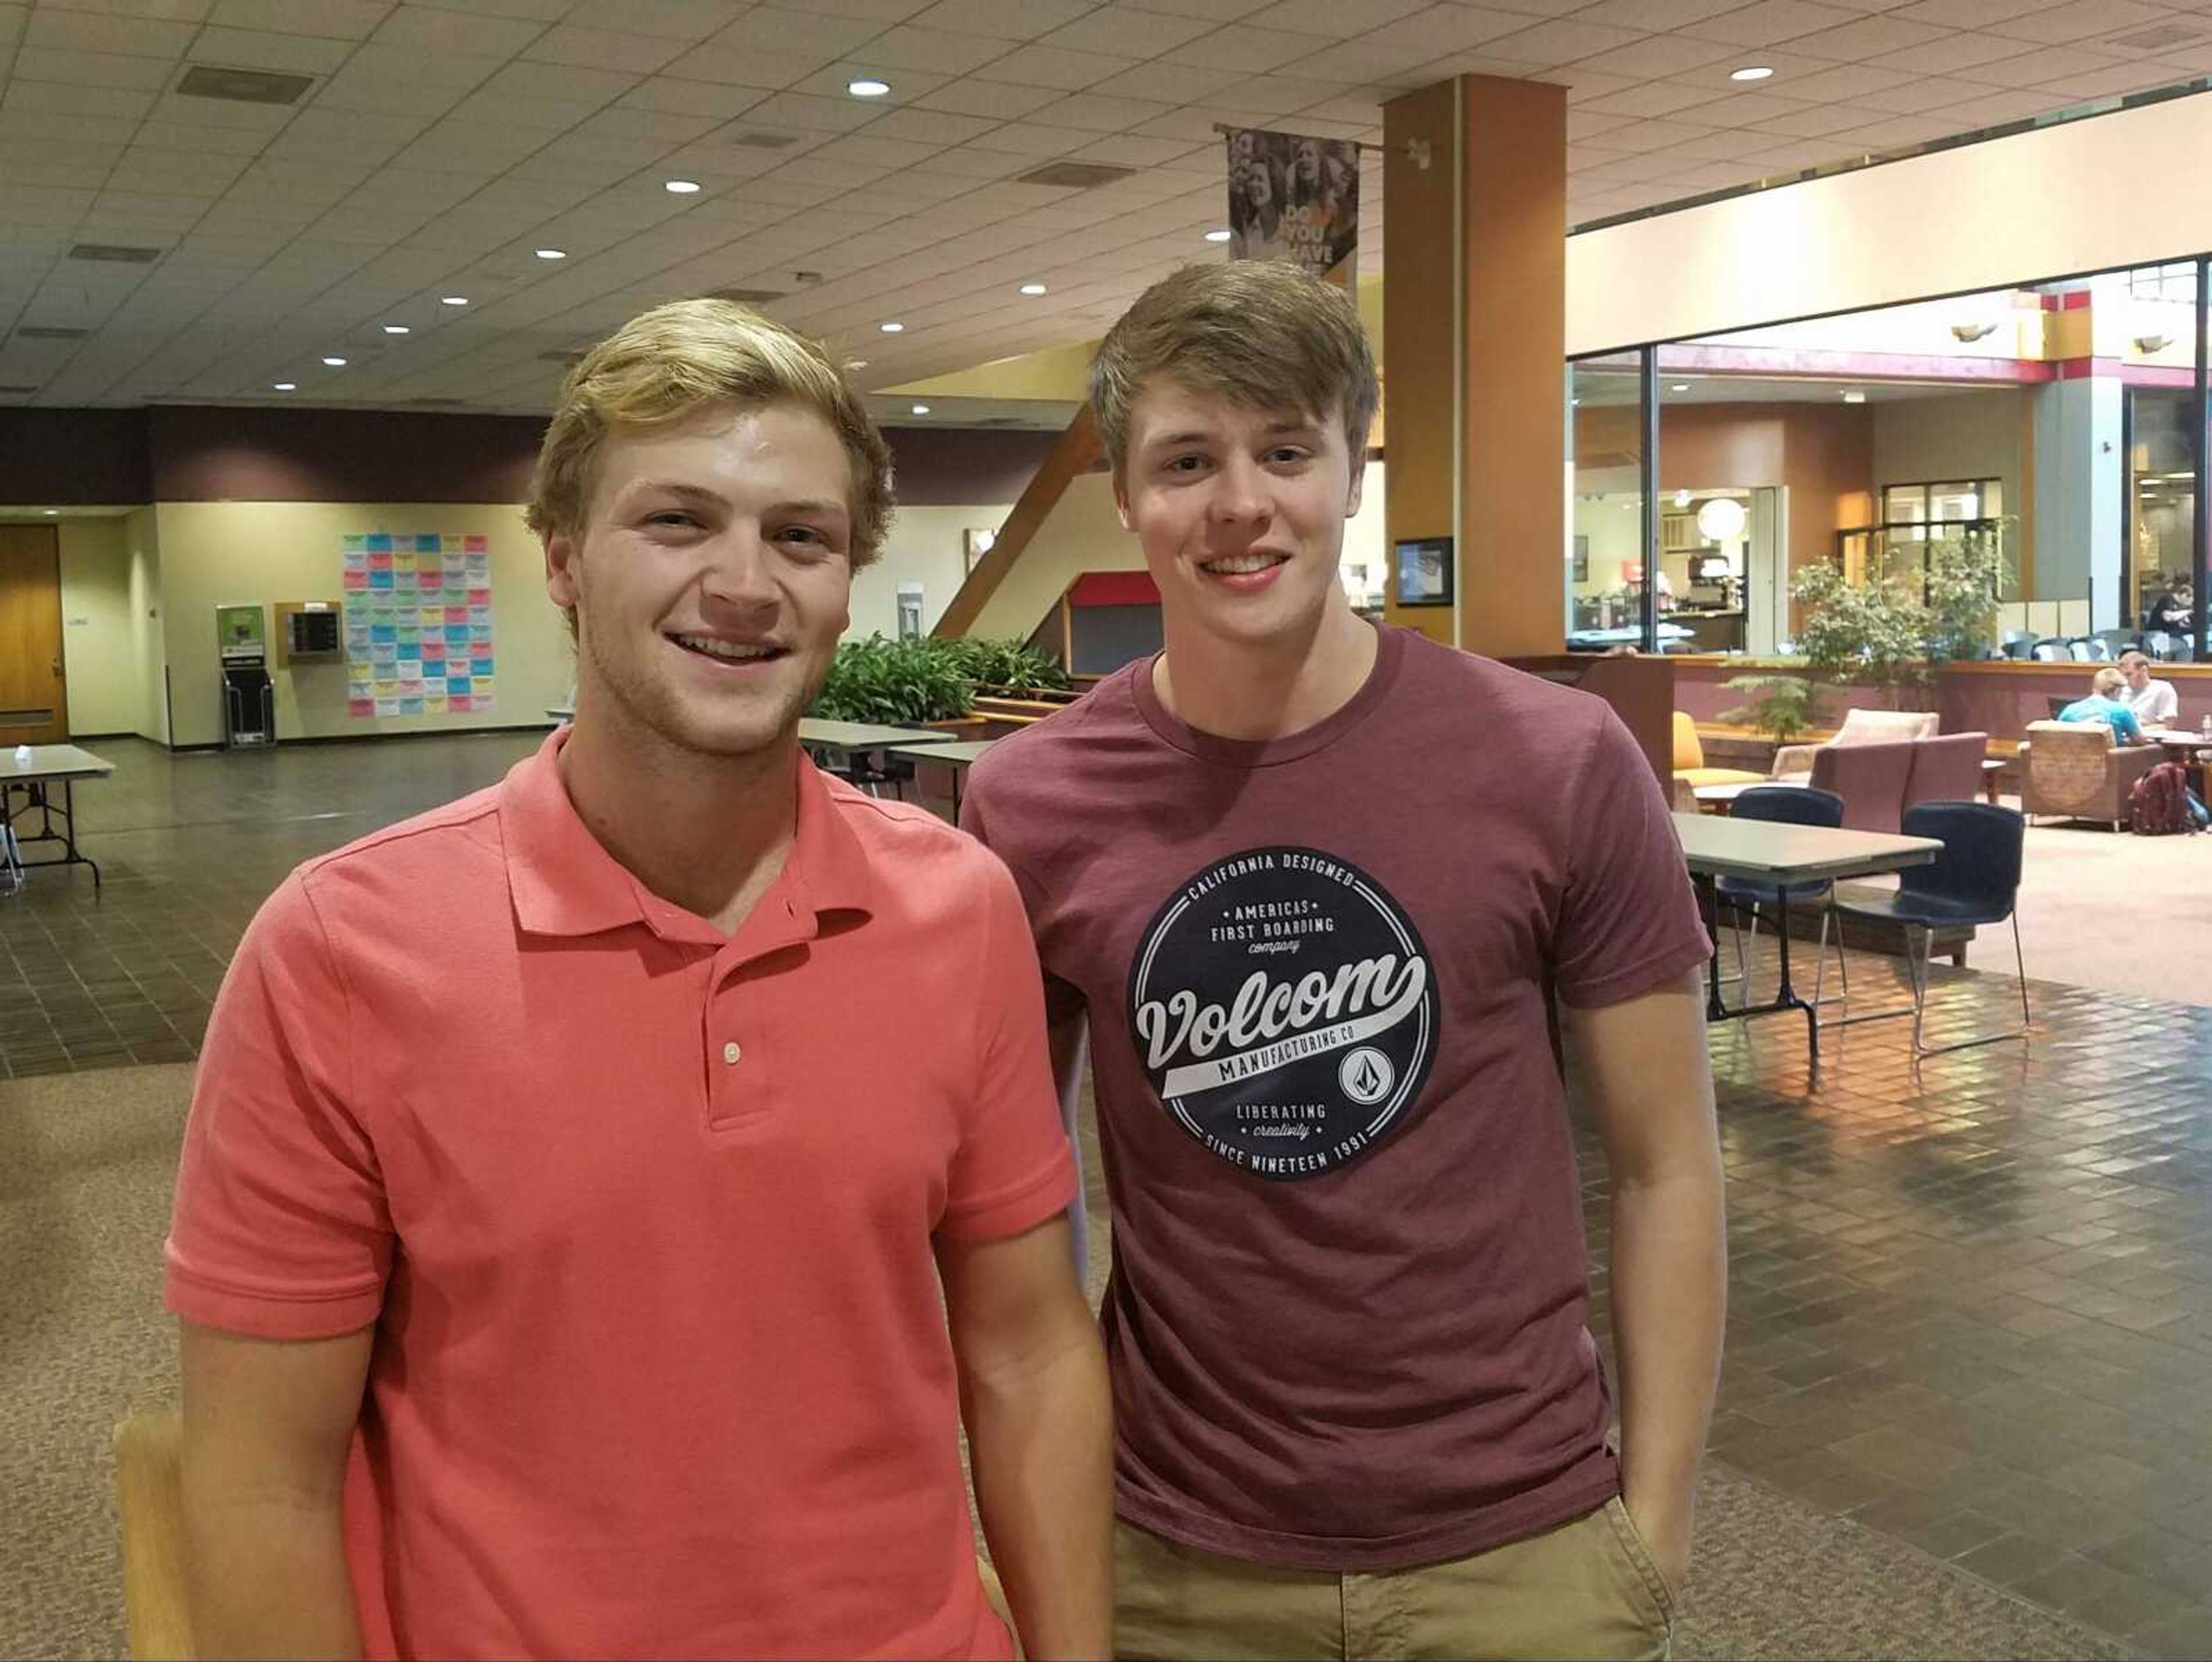 SEMO Snow Ski and Snowboard Club founders Dylan Rainbolt (left) and Trevor Fauss (right).